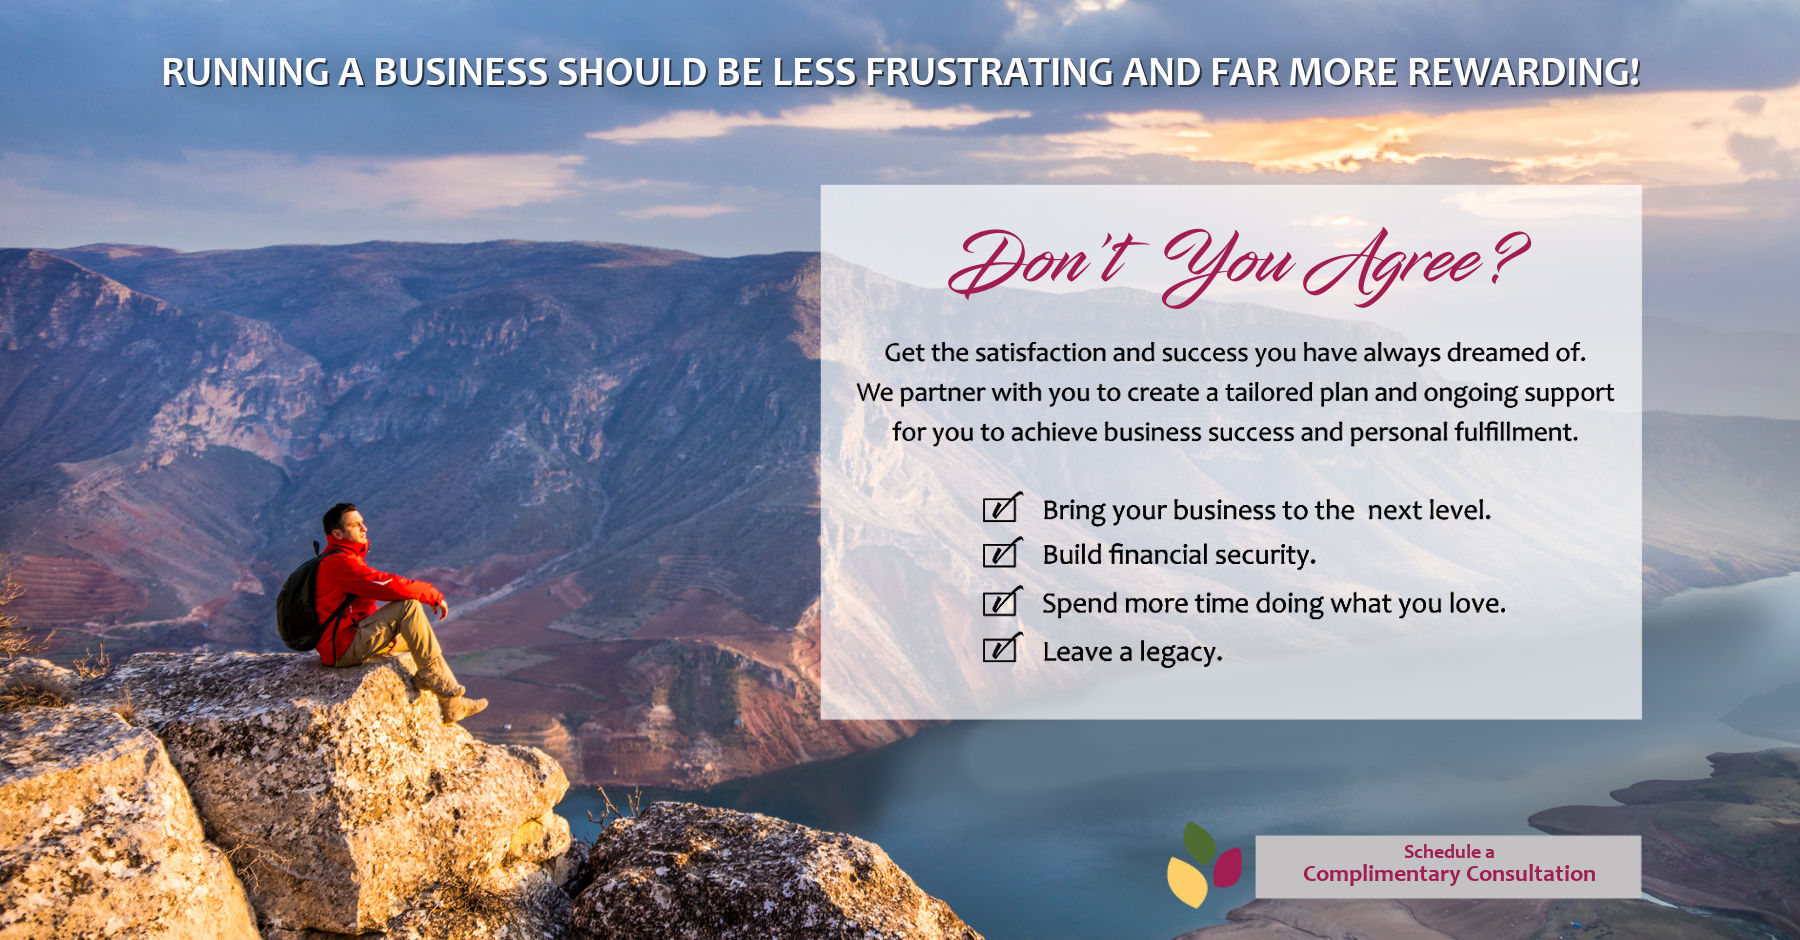 Running a business should be less frustrating and far more rewarding!